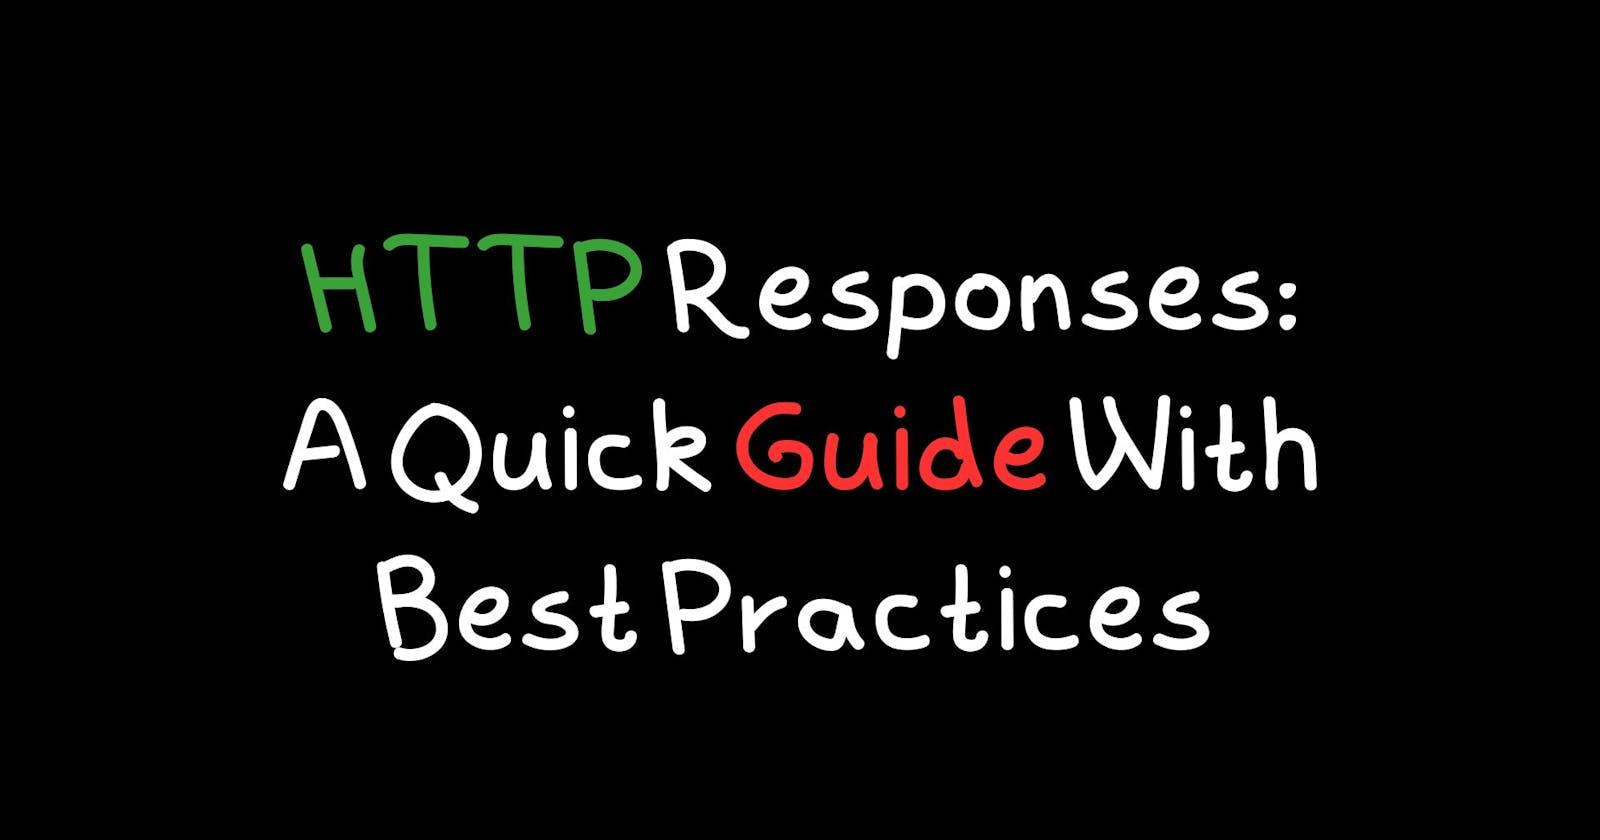 HTTP Responses: A Quick Guide With Best Practices